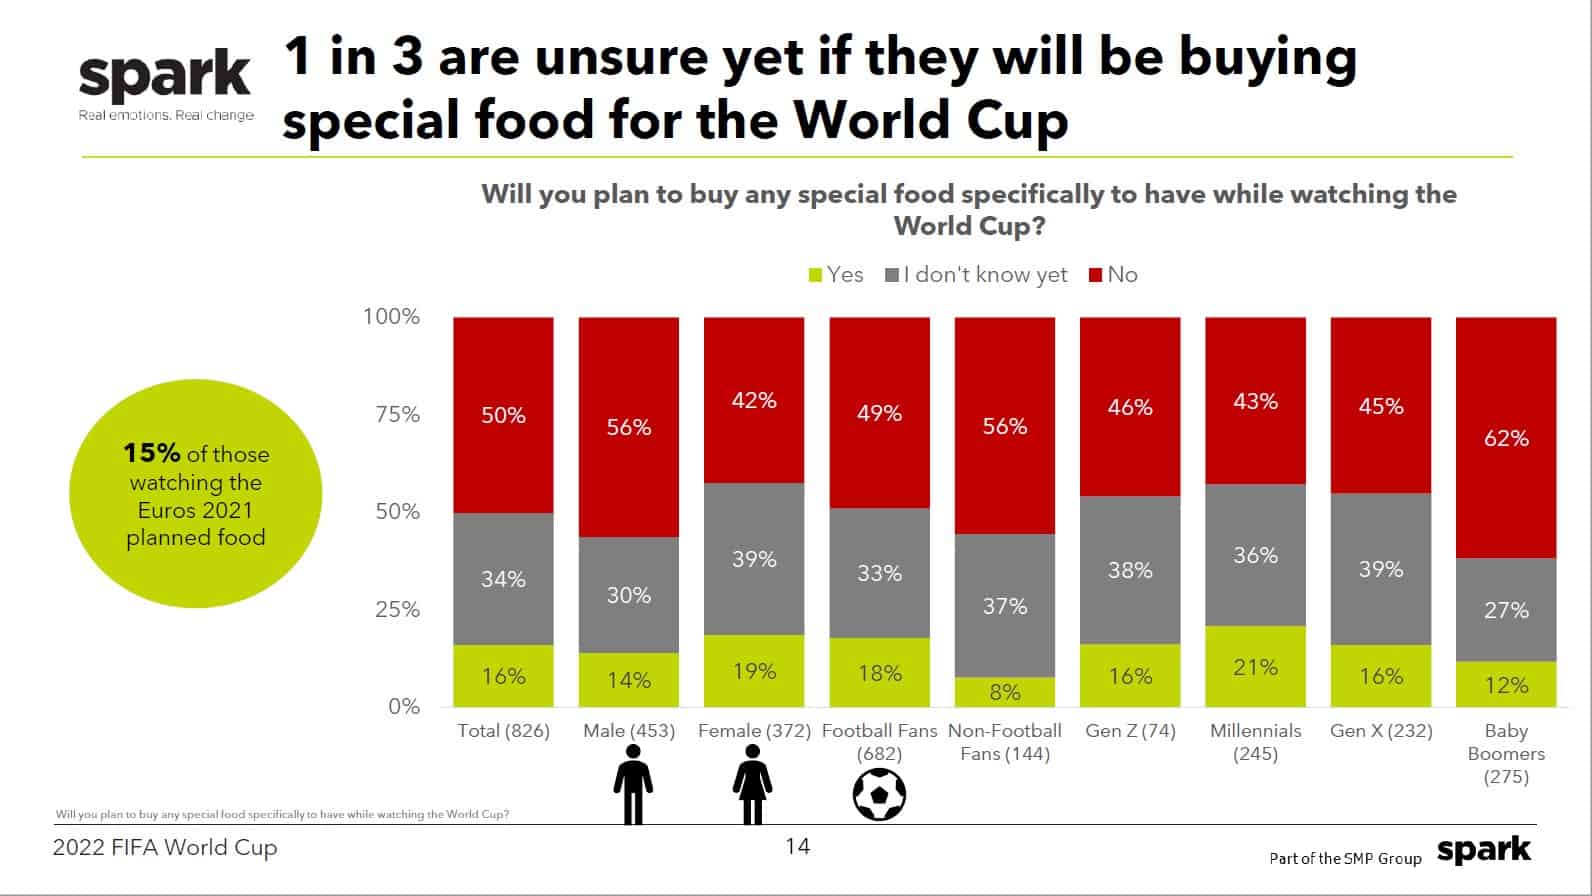 Football fans are unsure of what food to eat when watching the FIFA 2022 World Cup